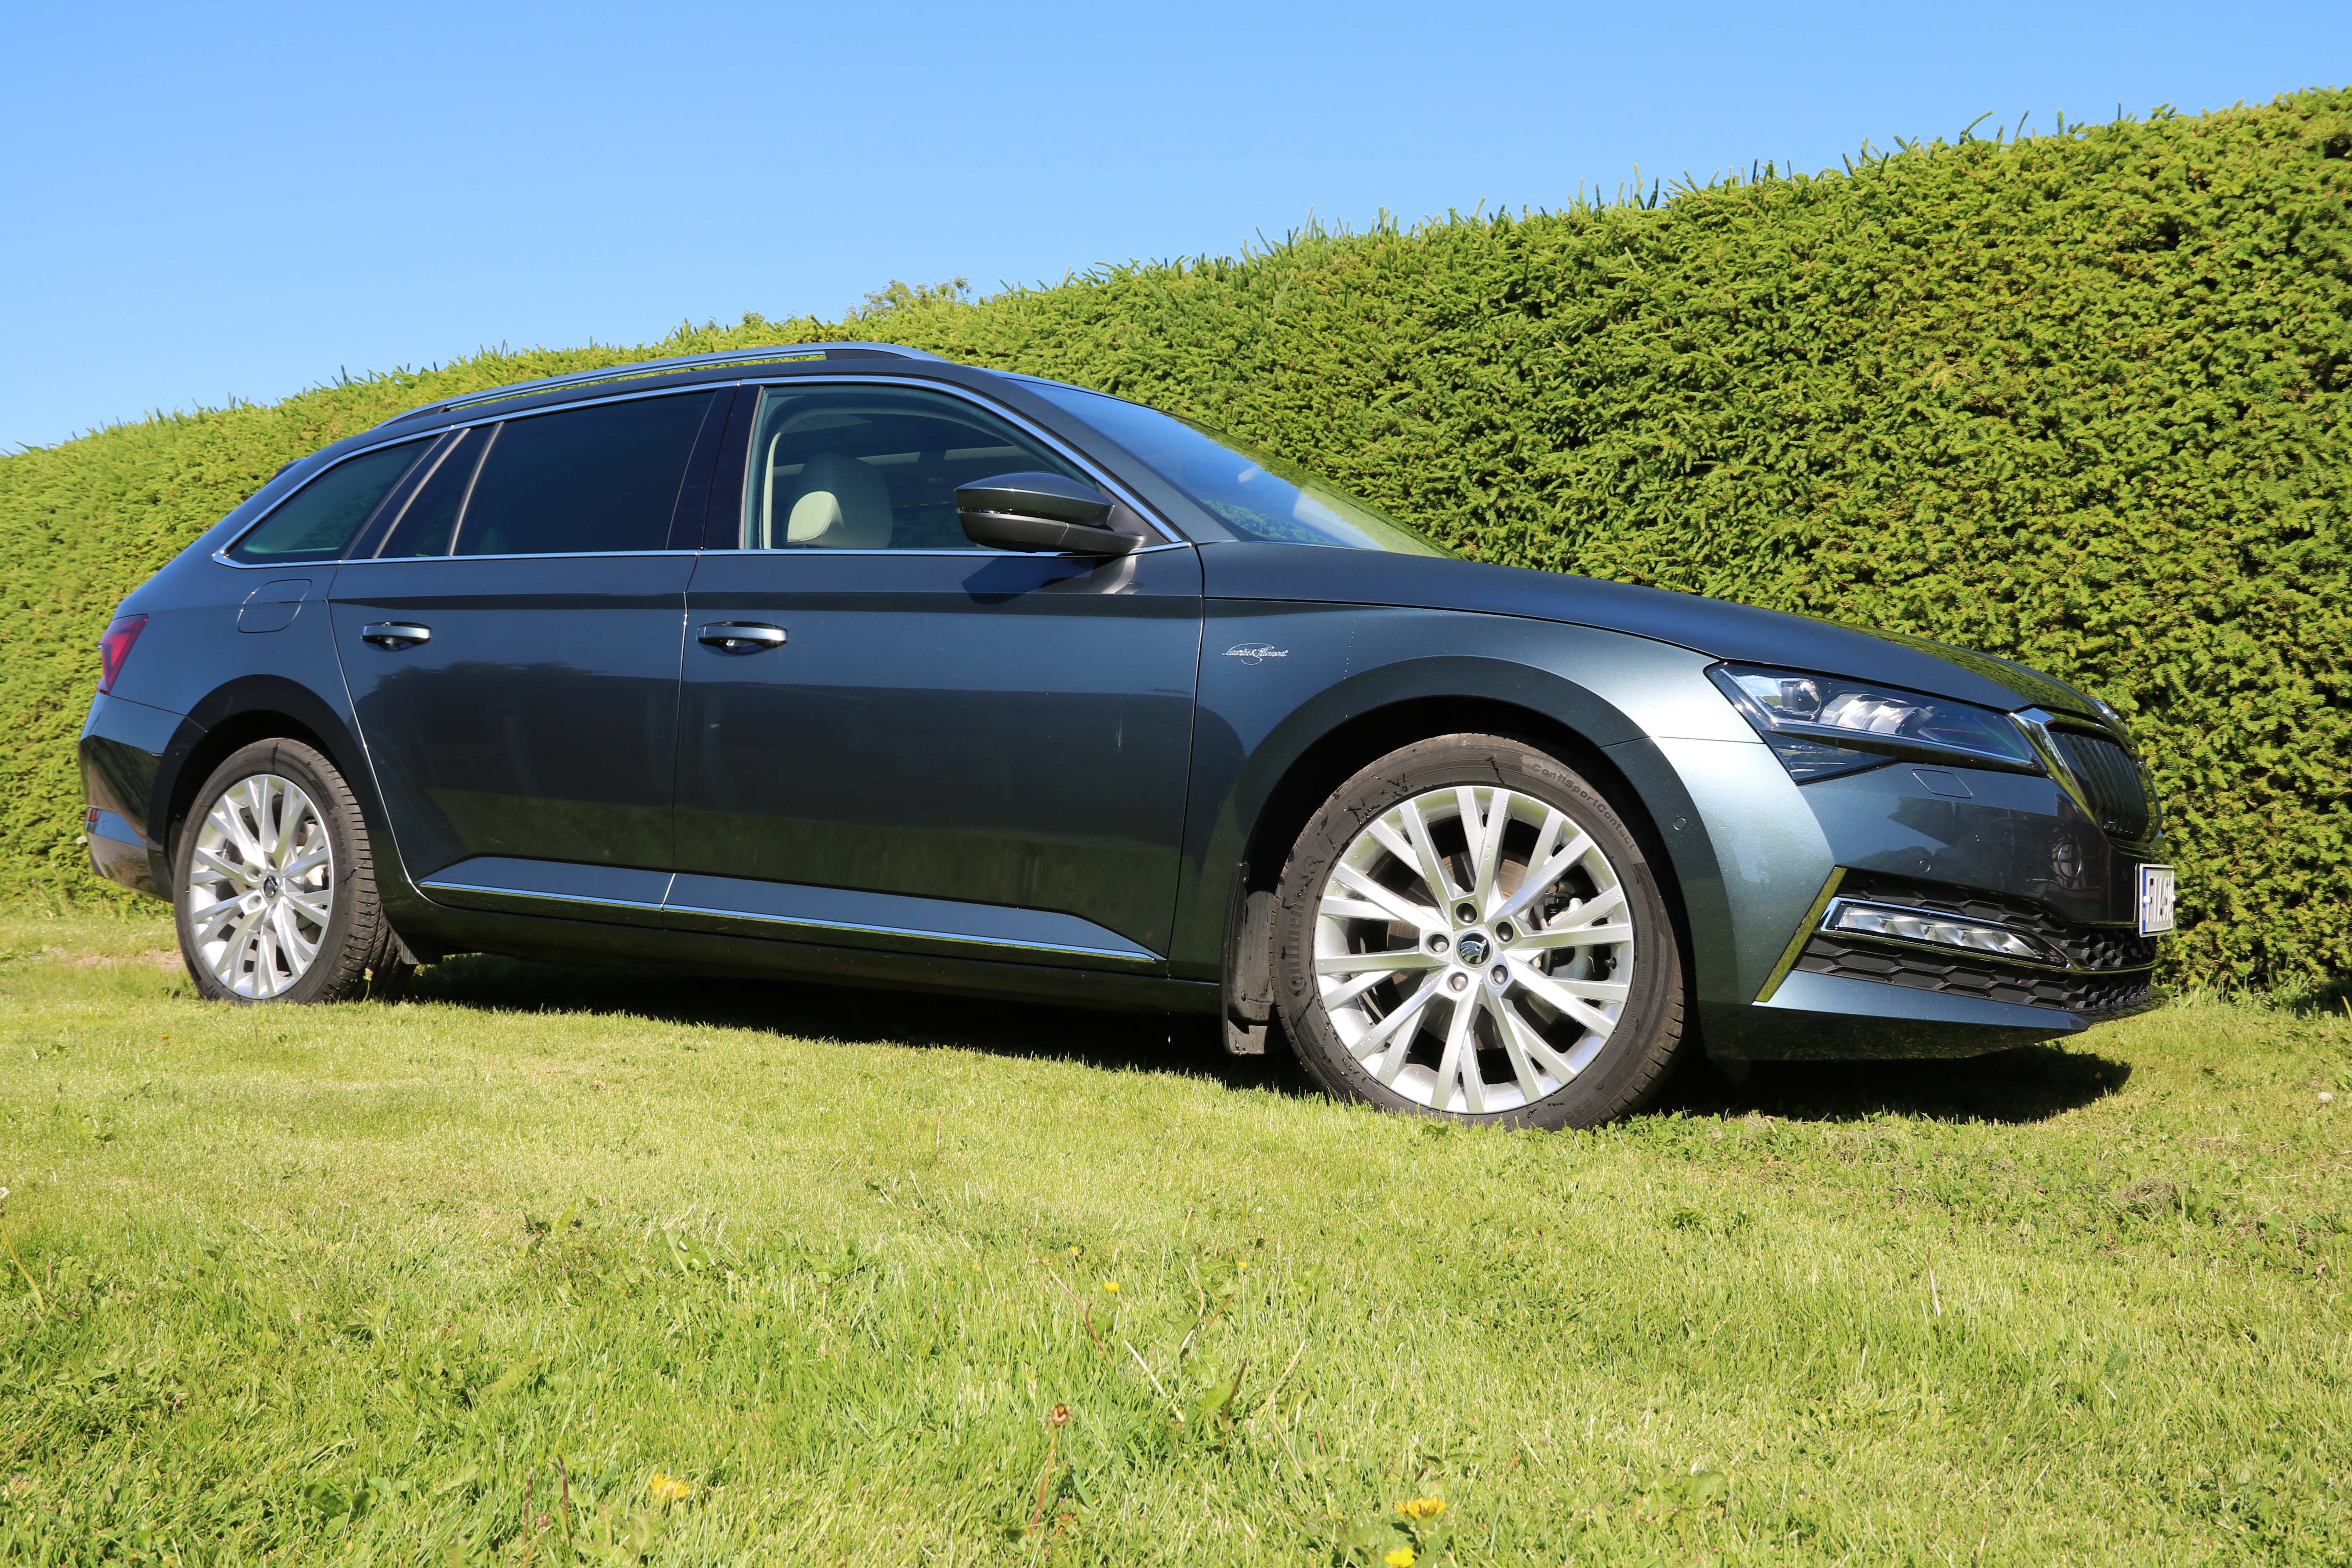 Skoda Superb Combi iV from the side